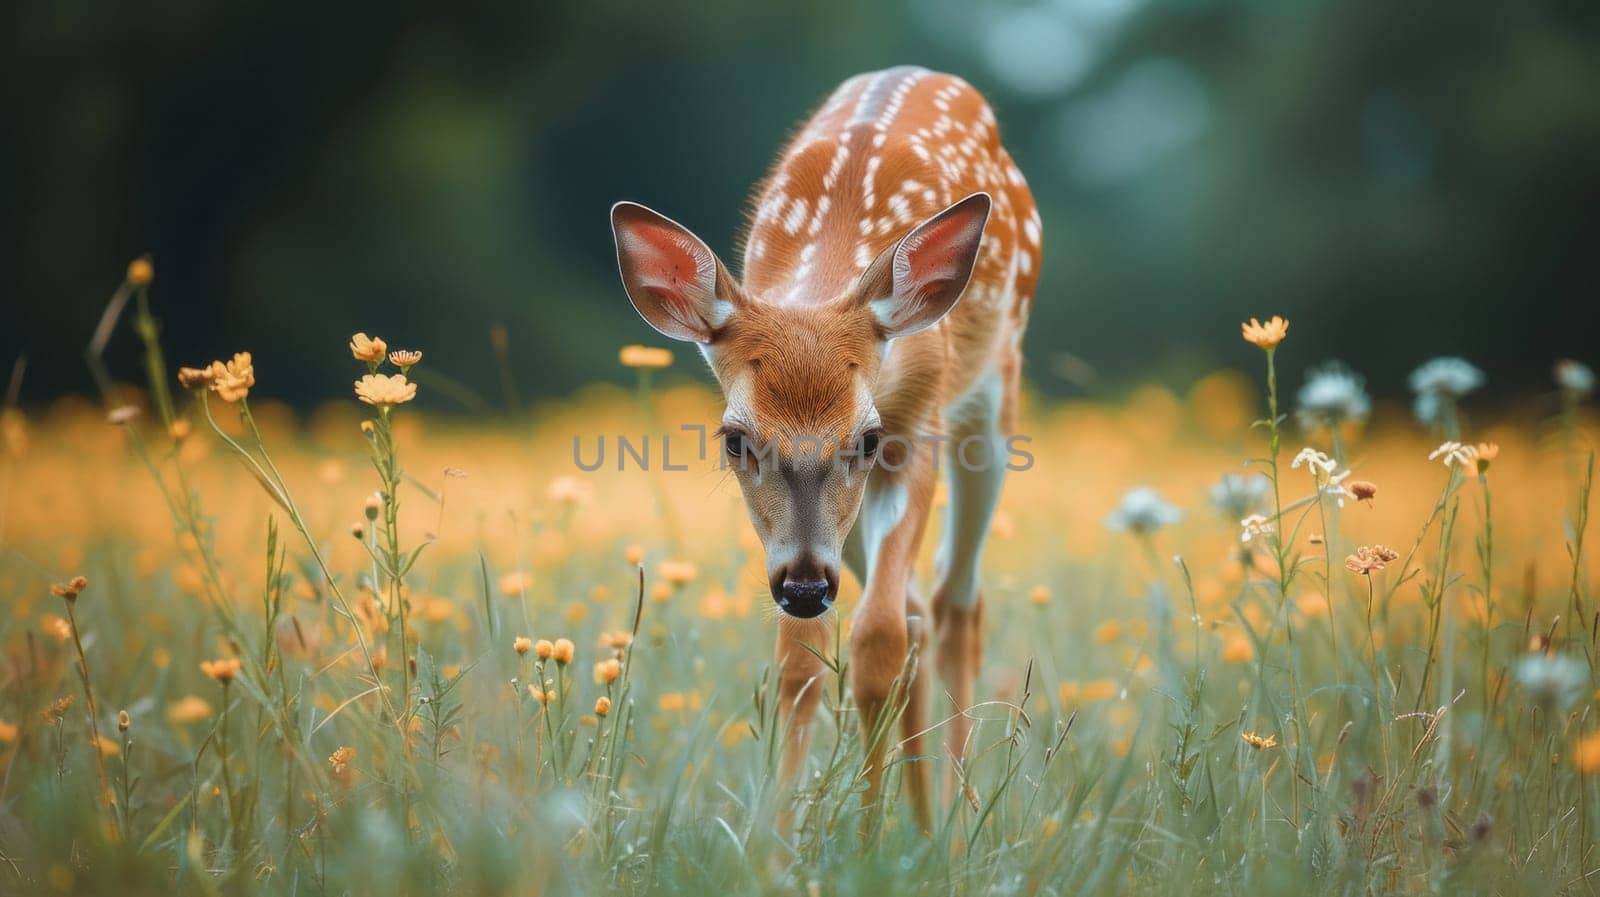 A small deer is standing in a field of yellow flowers